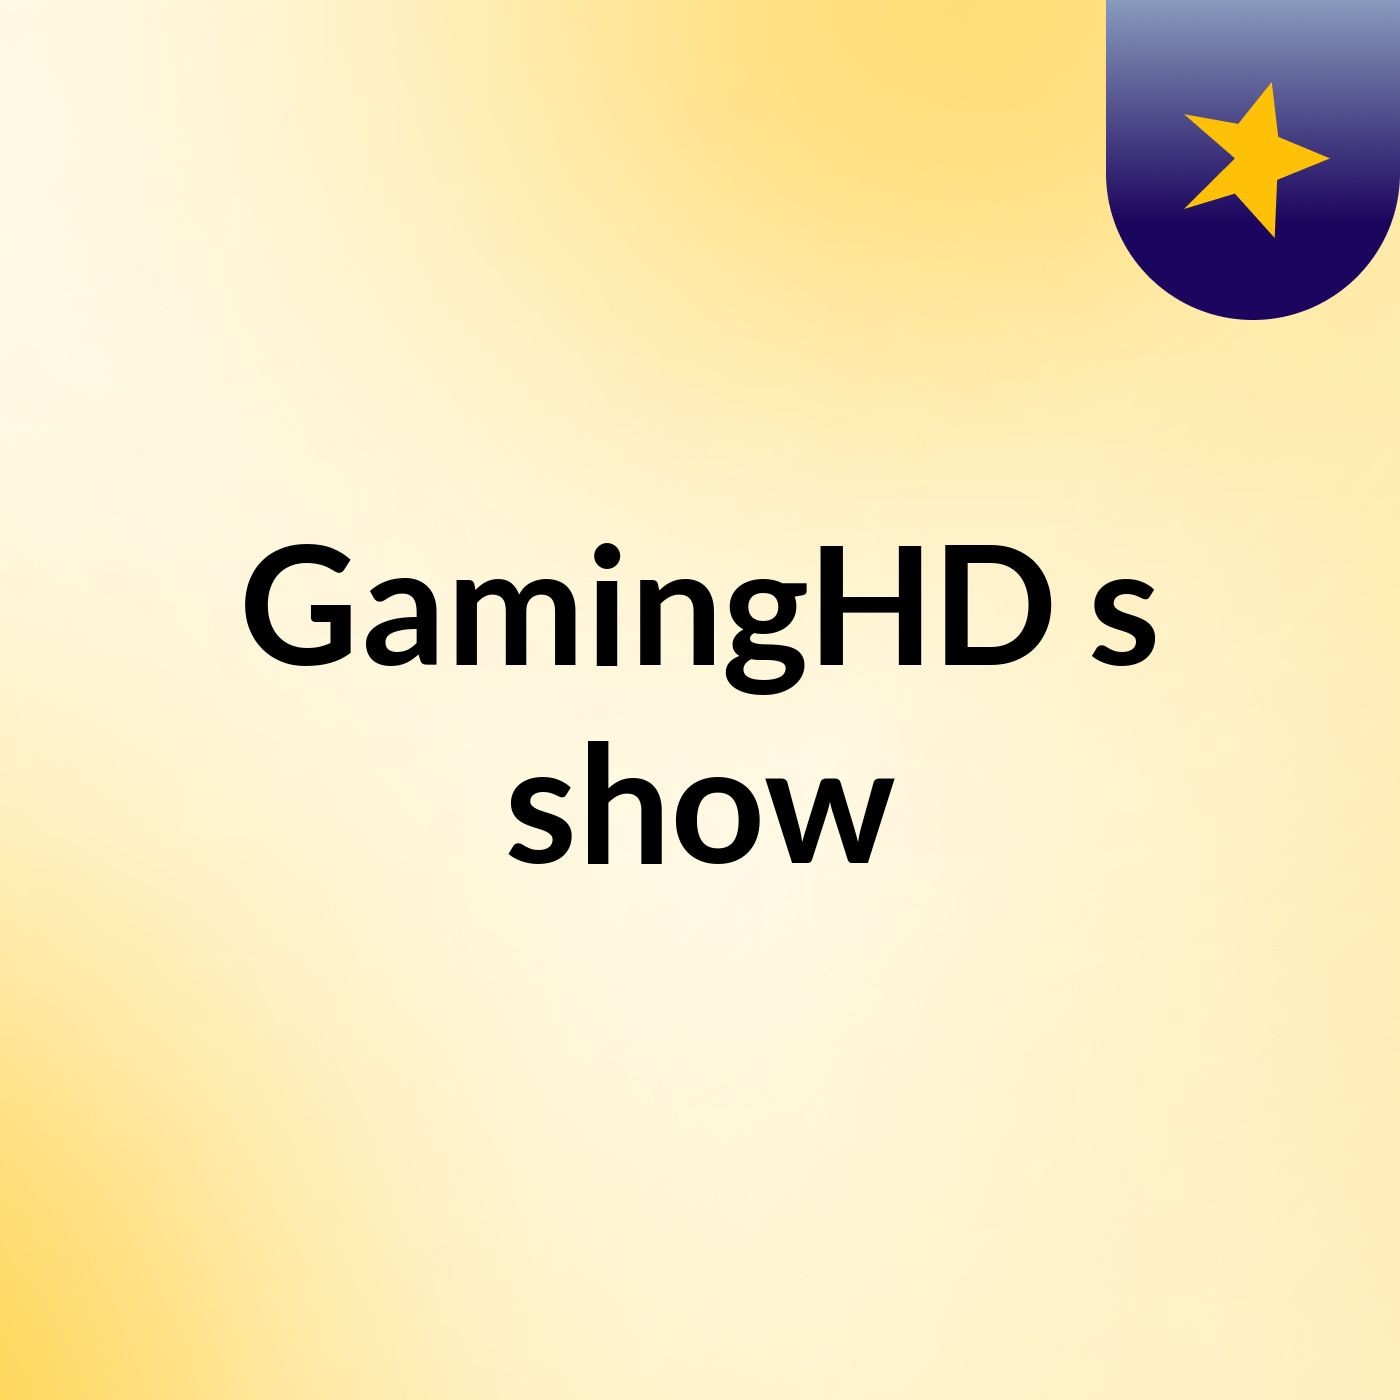 GamingHD's show